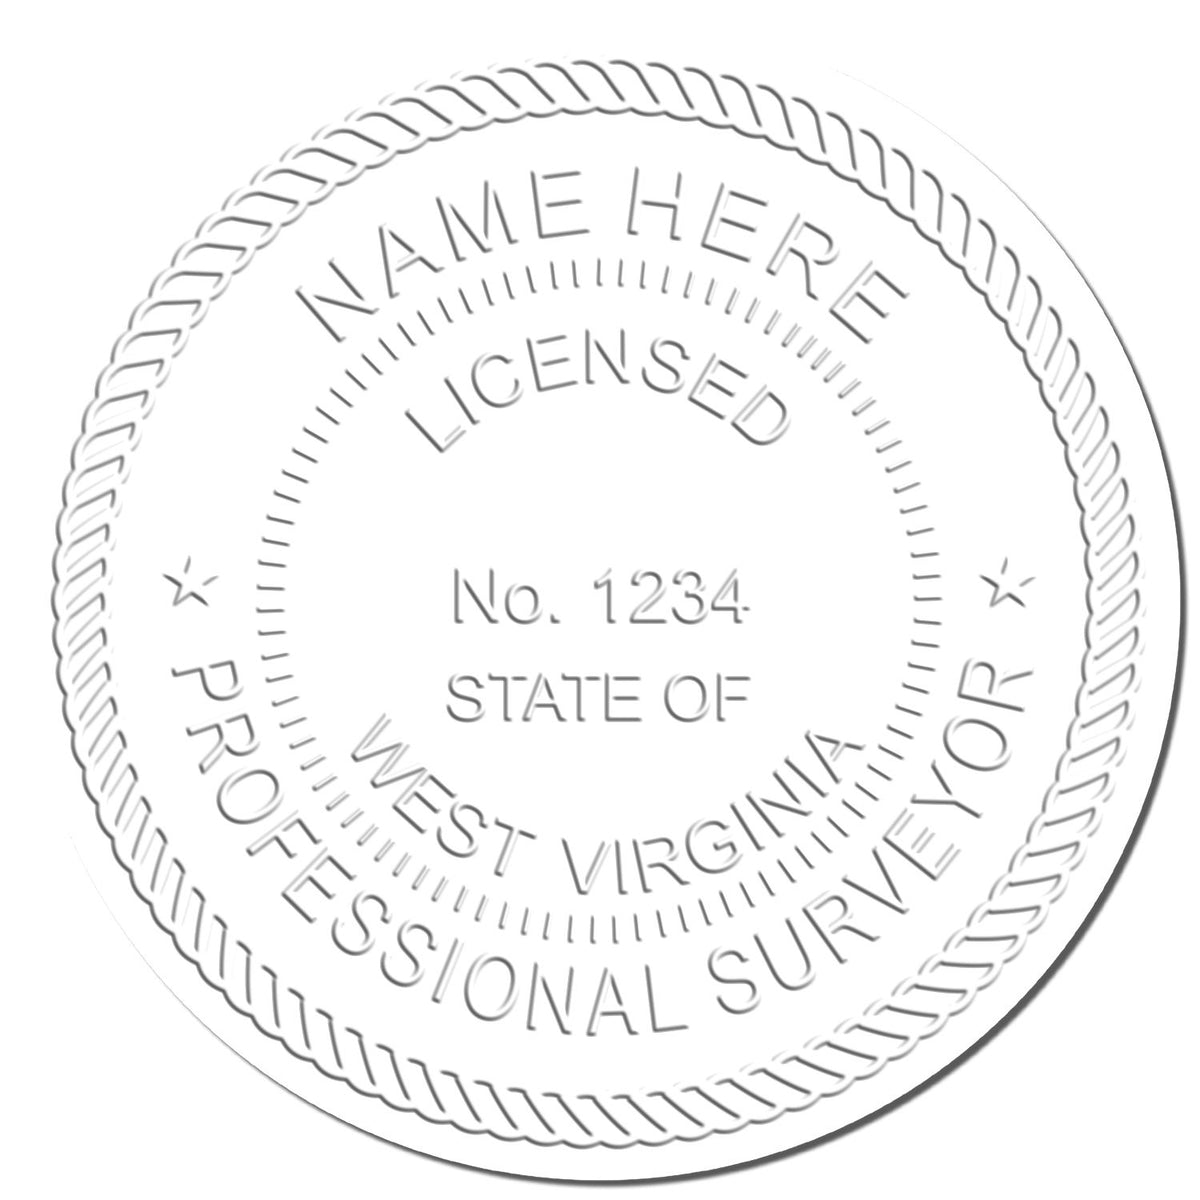 This paper is stamped with a sample imprint of the Hybrid West Virginia Land Surveyor Seal, signifying its quality and reliability.